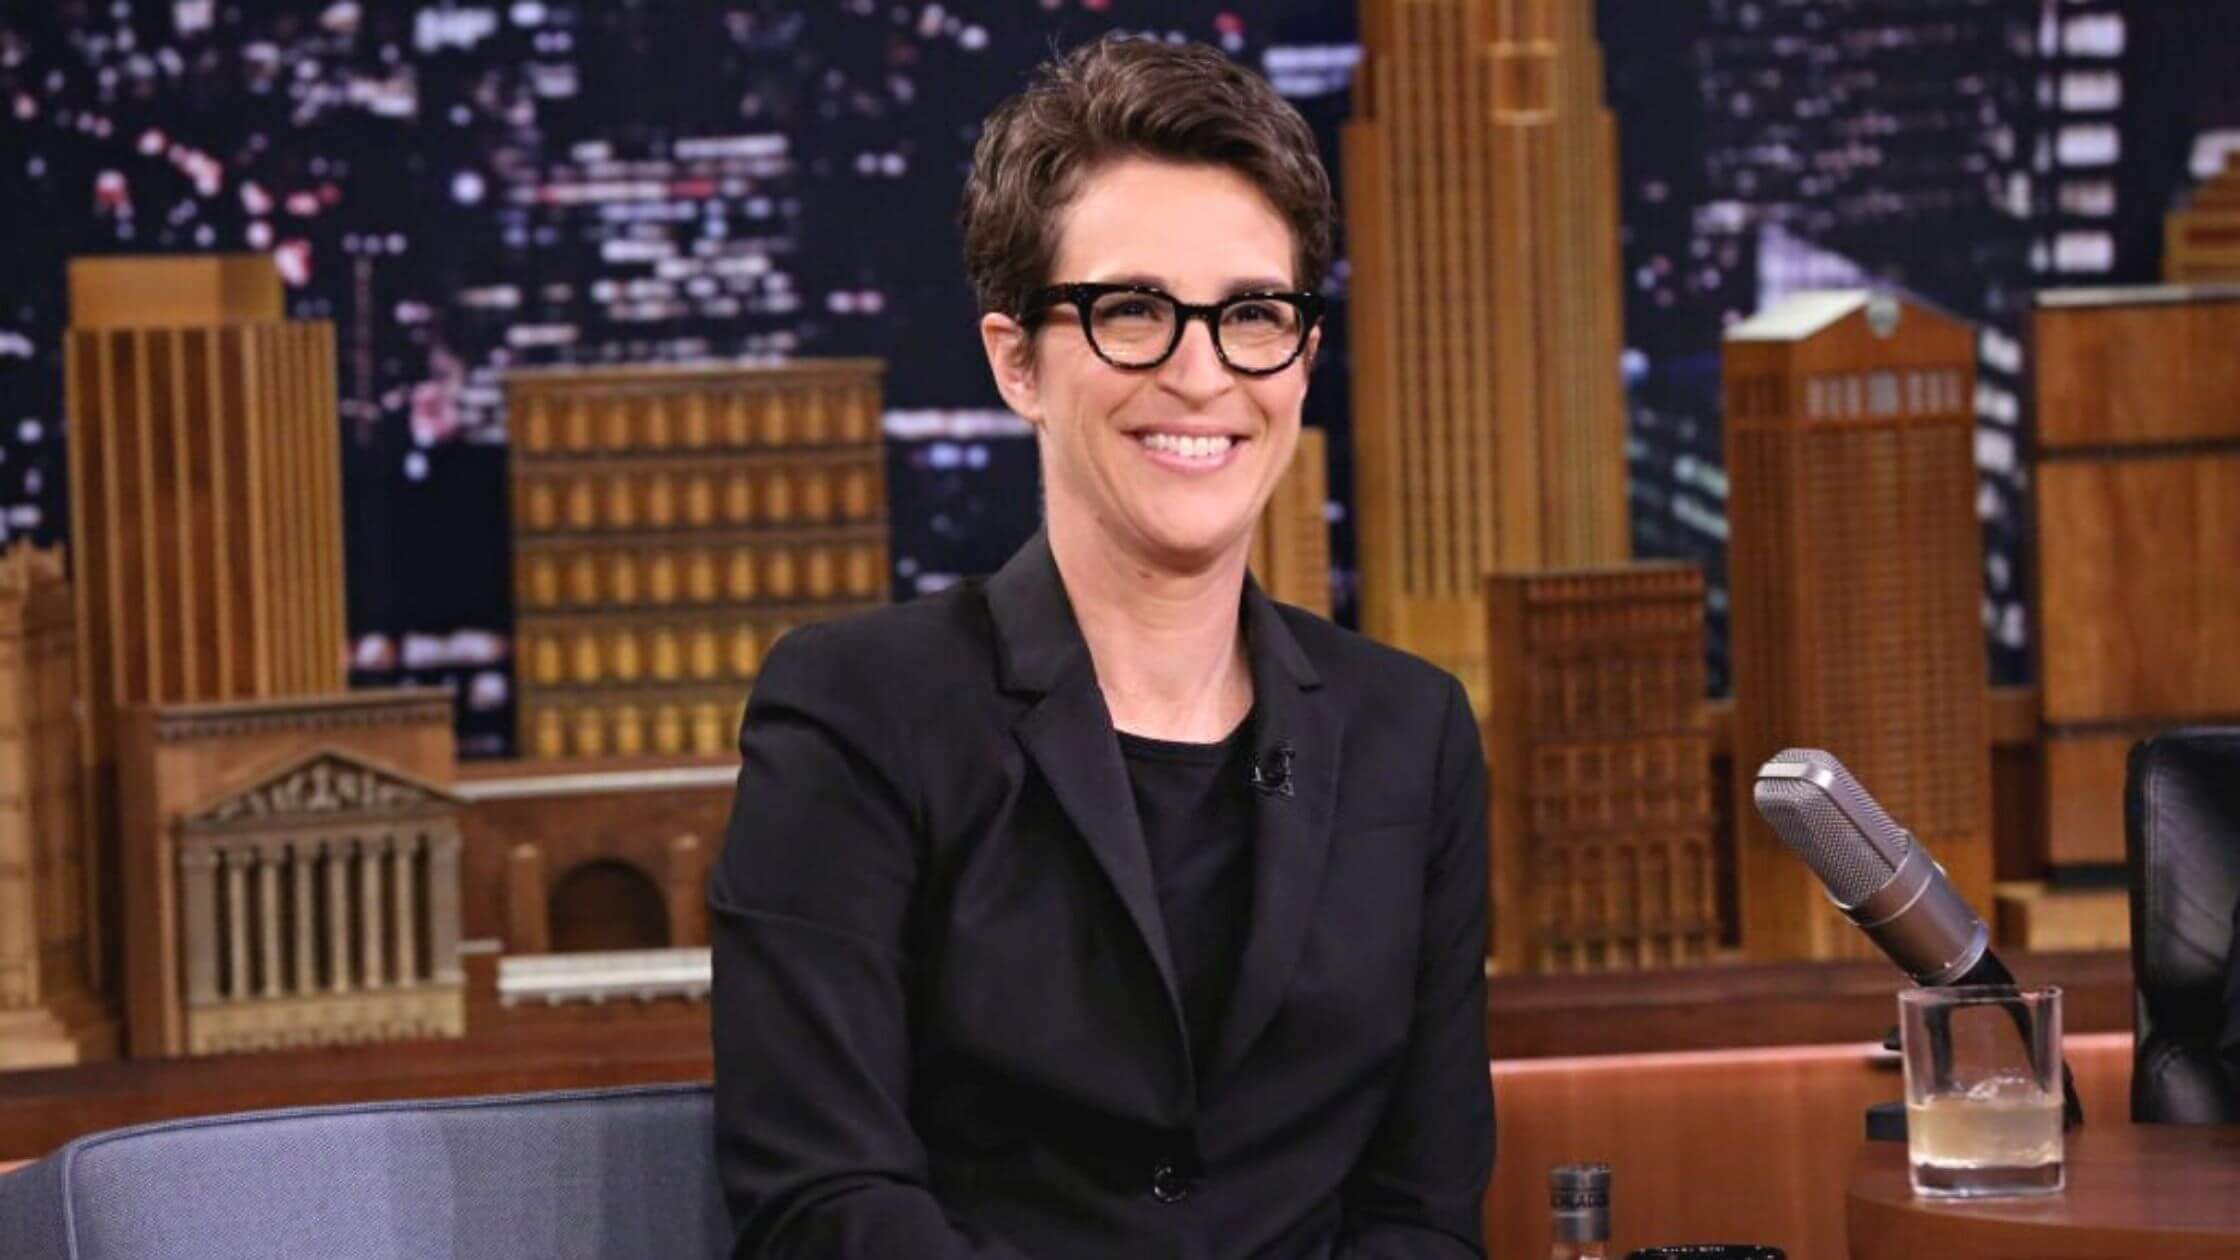 Why-Not-Rachel-Maddow-Hasnt-Appeared-On-Her-Show-Yet